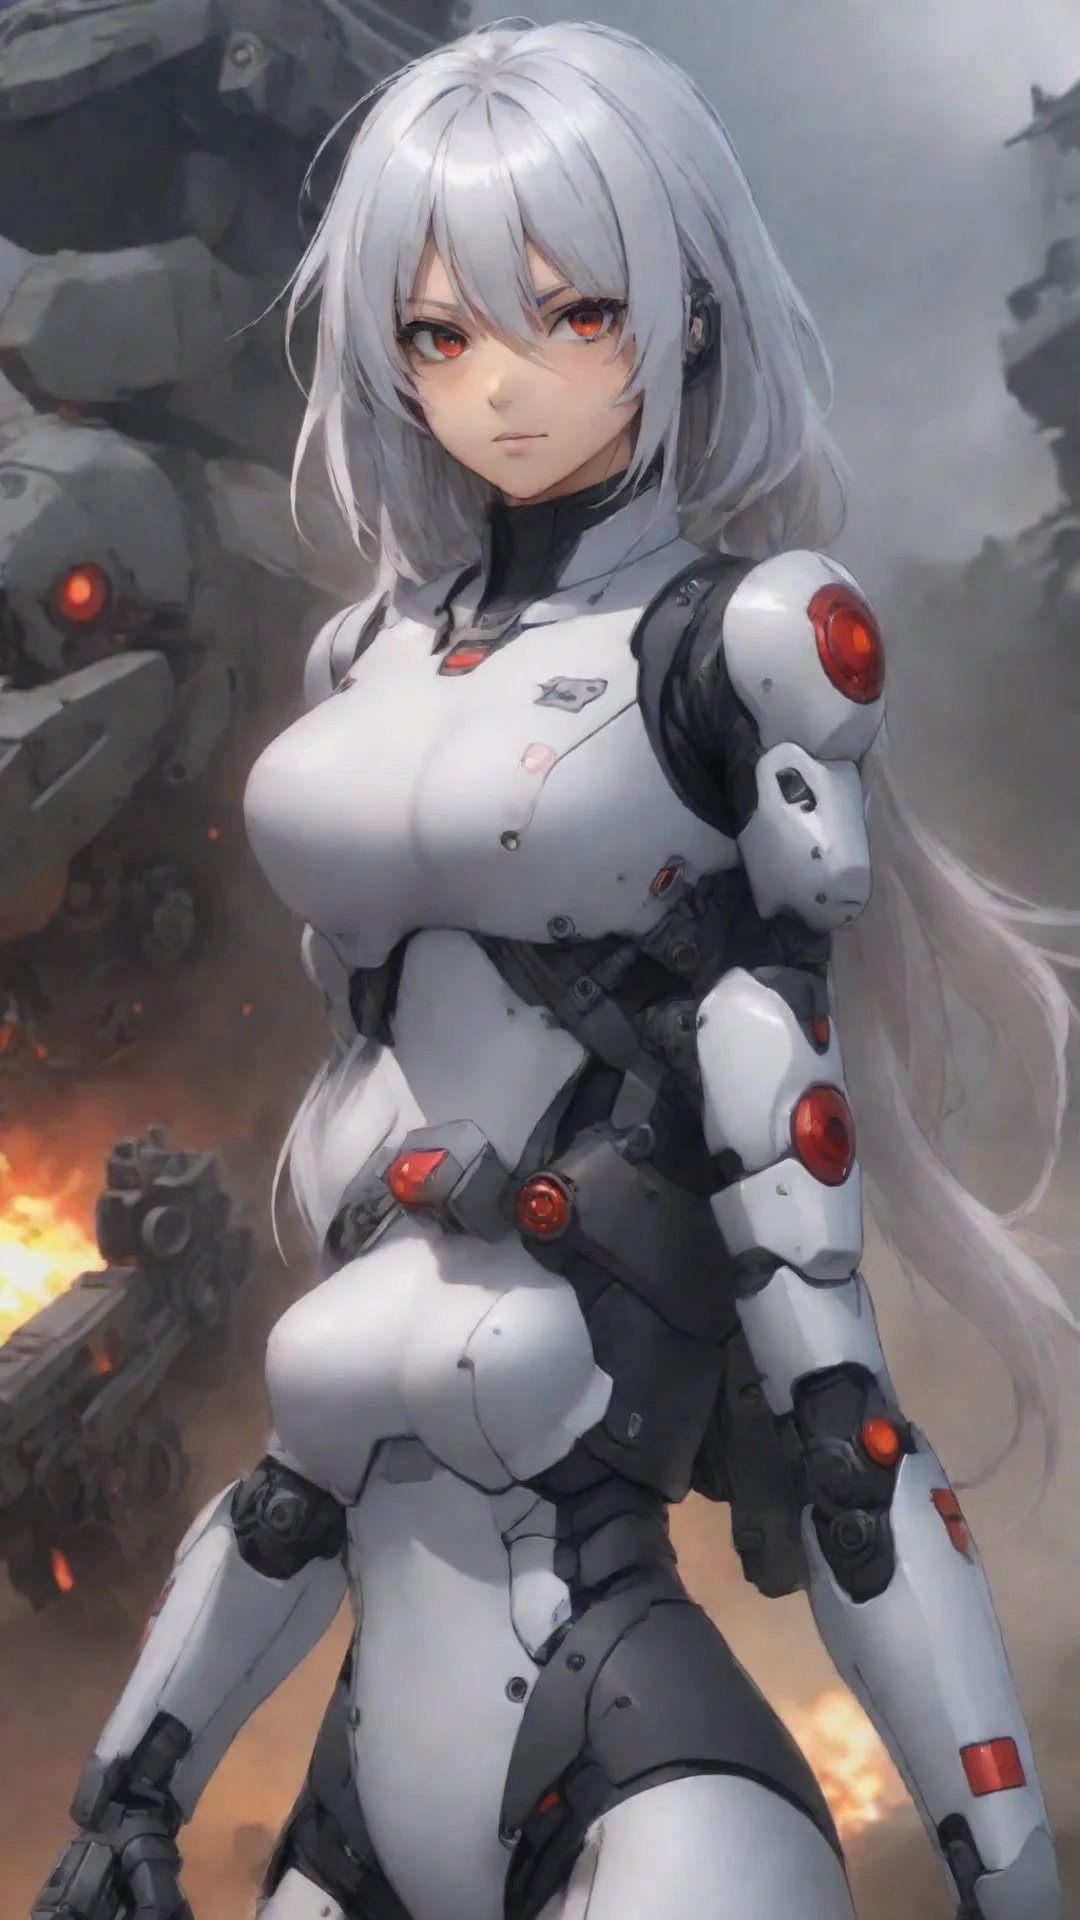 aiamazing anime girl silver hair red eyes mecha pilot with carbine standing in war zone awesome portrait 2 tall